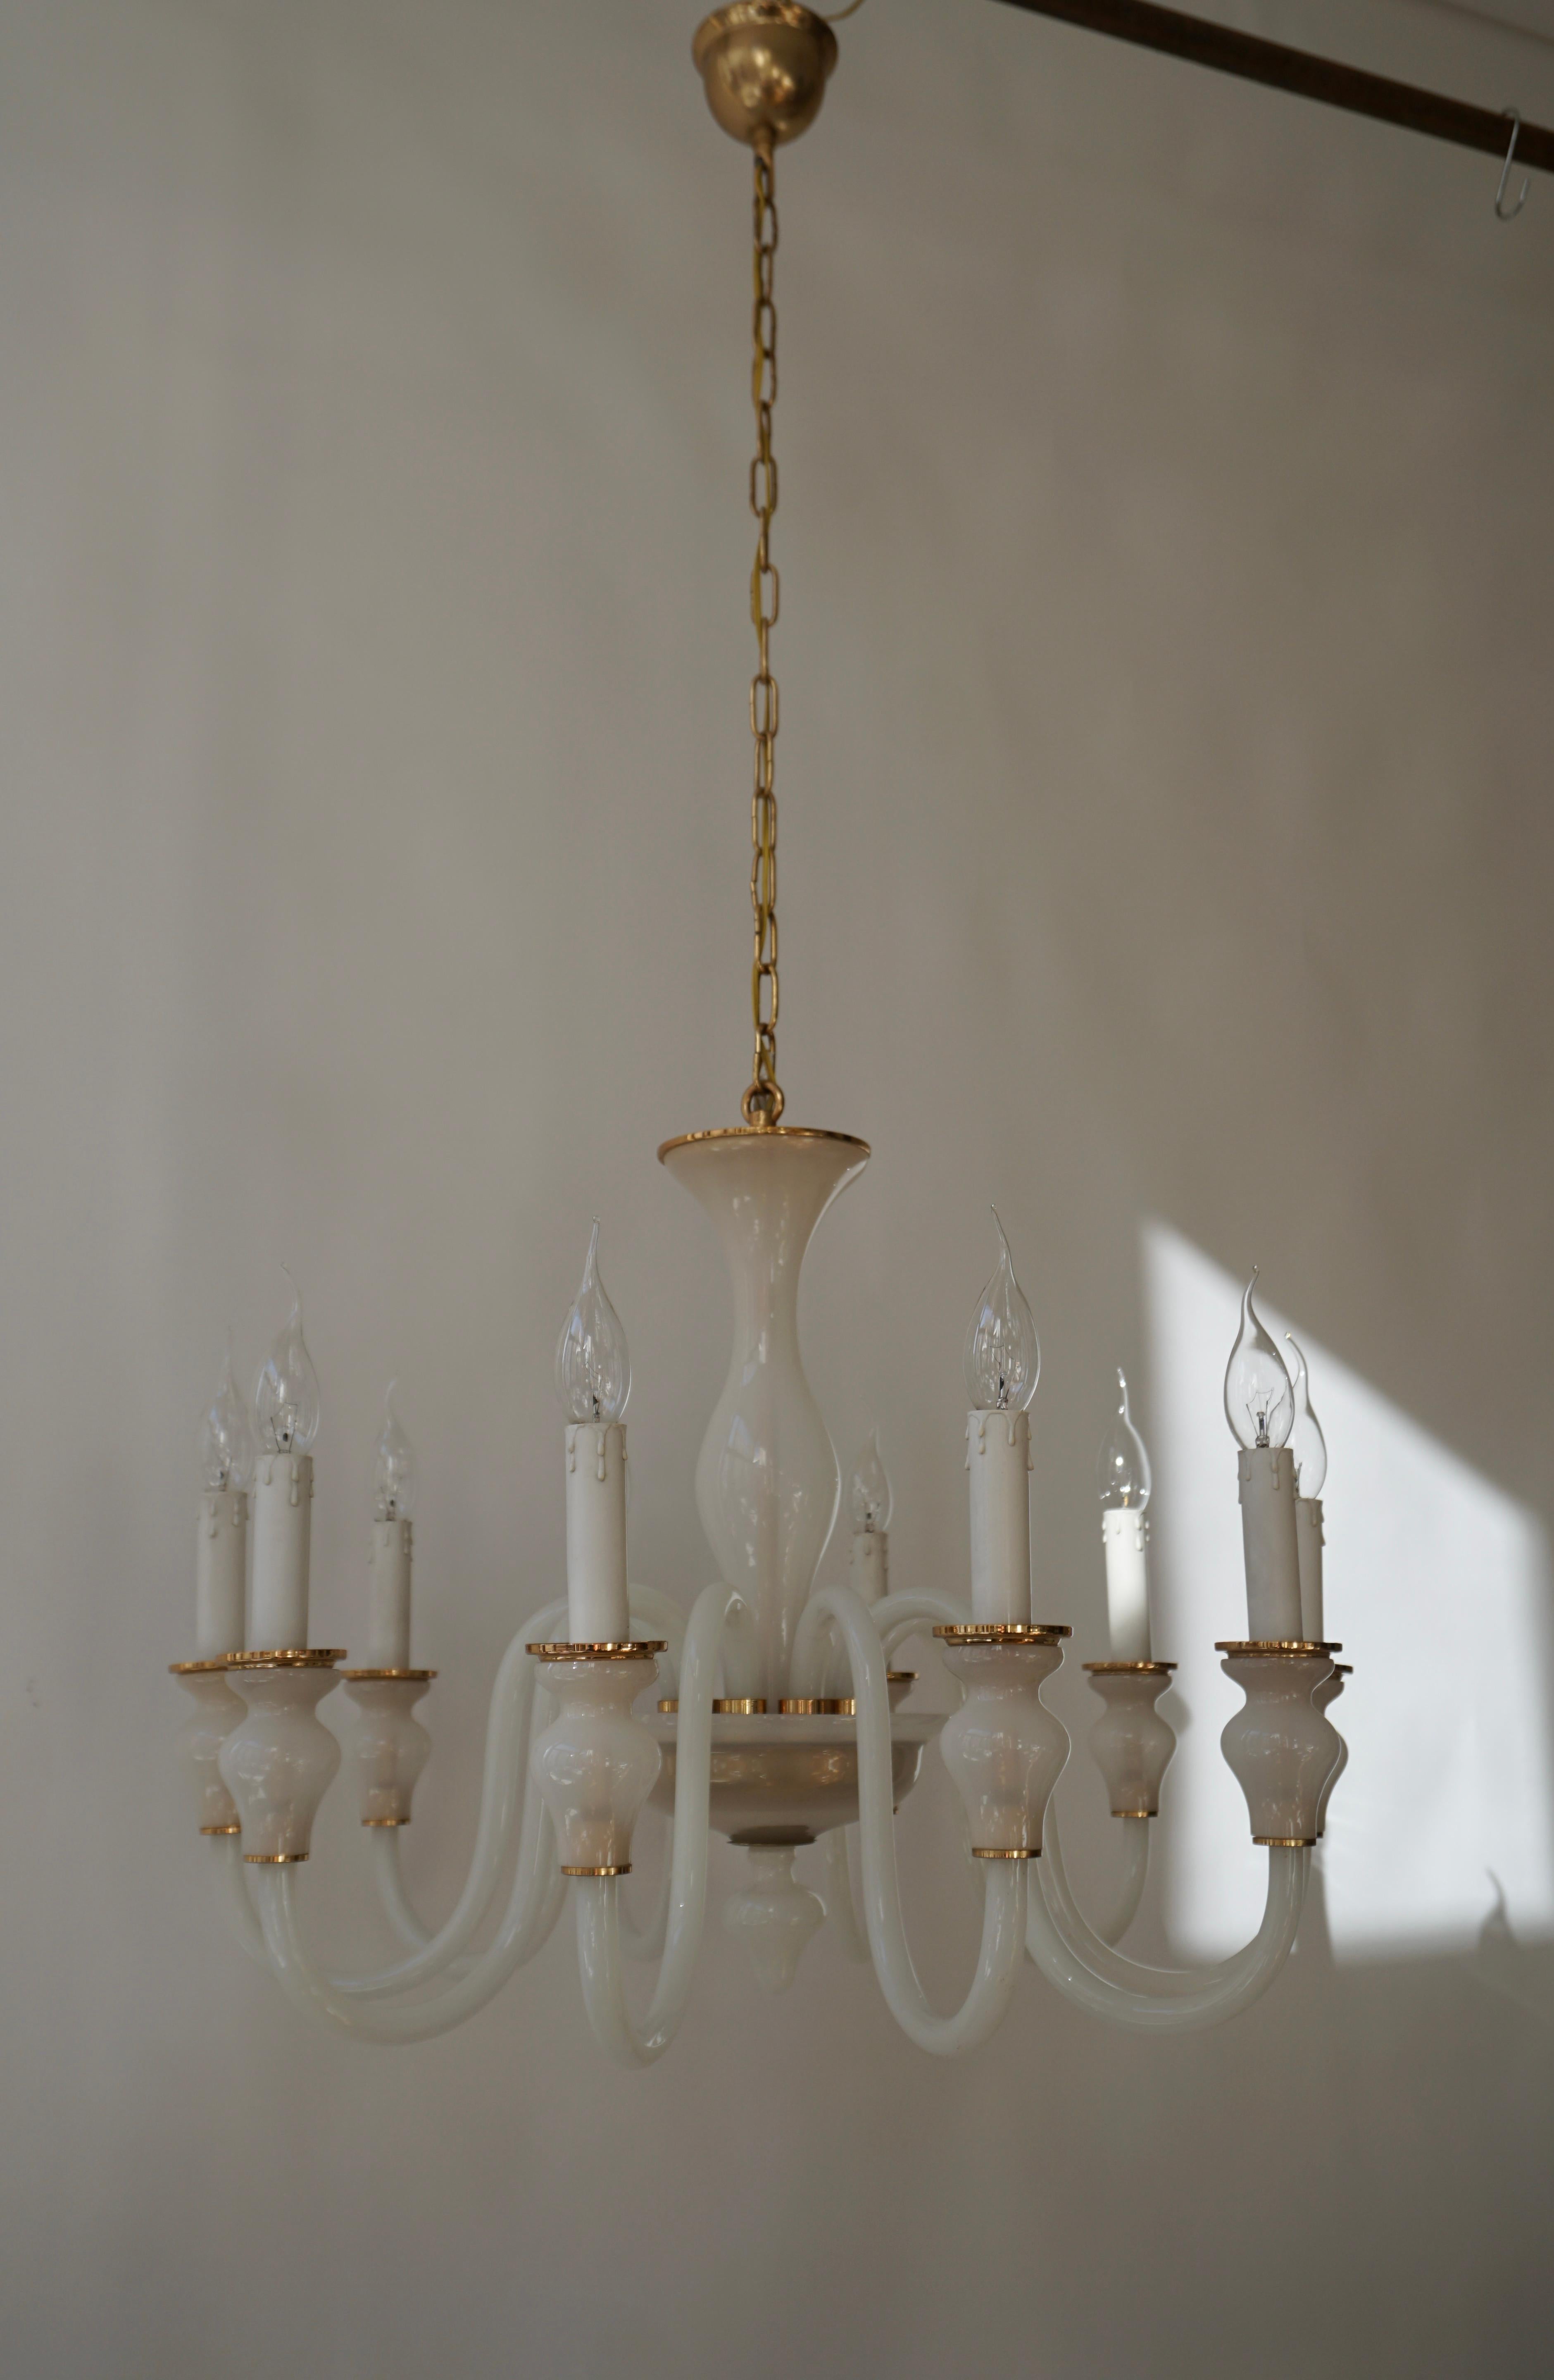 Italian mid-century style hand blown Venetian glass chandelier or pendants in milky white glass, with ten arms, in the modern neoclassical tradition.

The height of the piece without chain is 21.4. With chain it can extend to 49